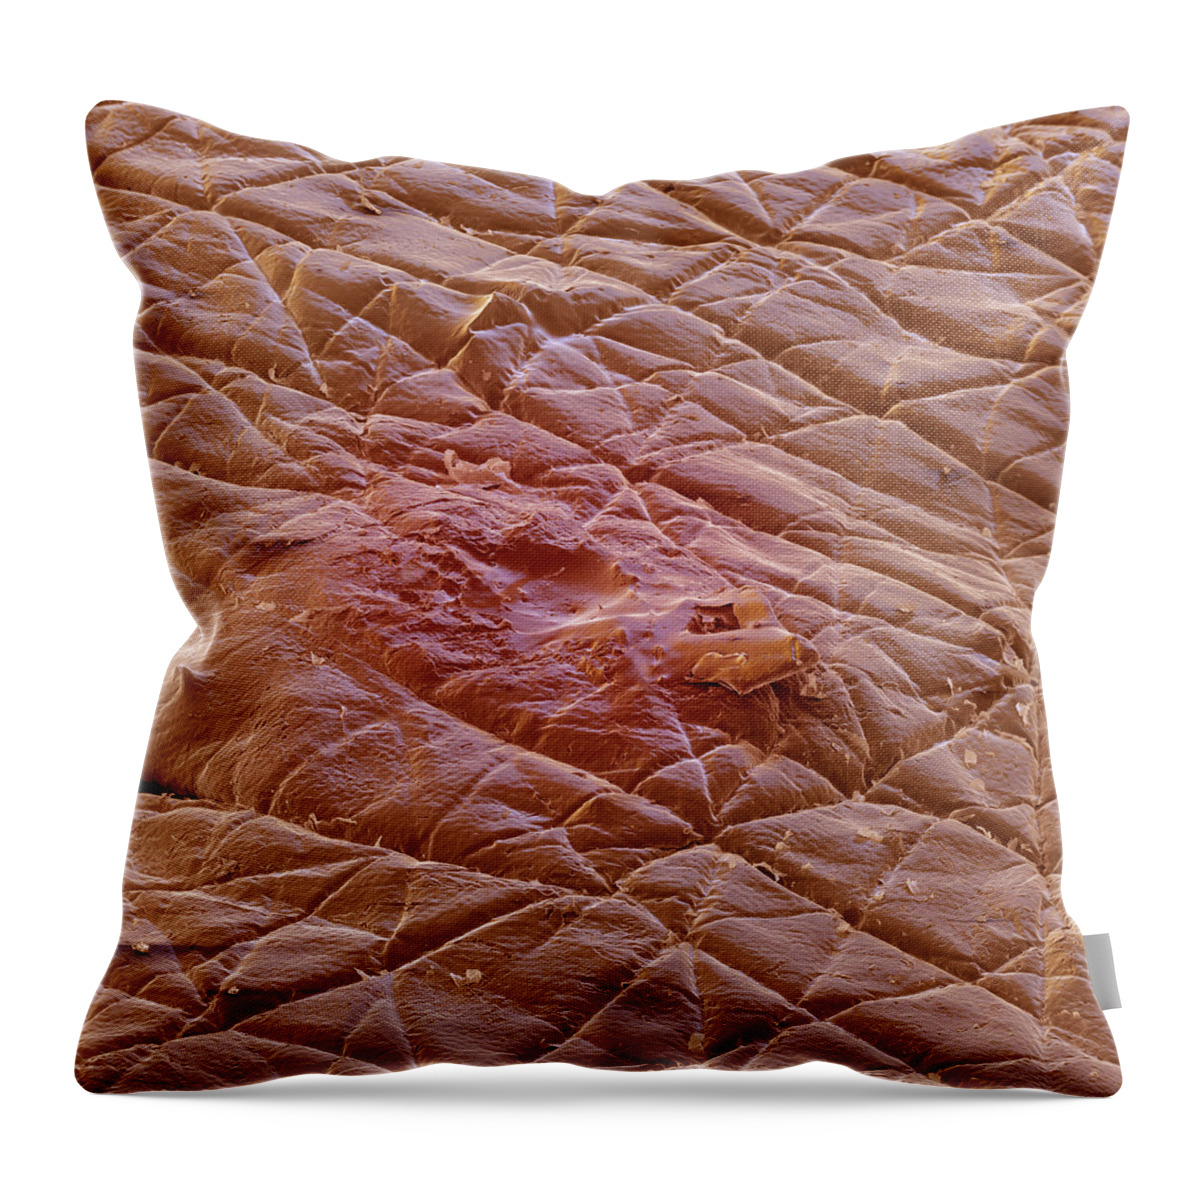 Acne Throw Pillow featuring the photograph Pimple by Meckes/ottawa